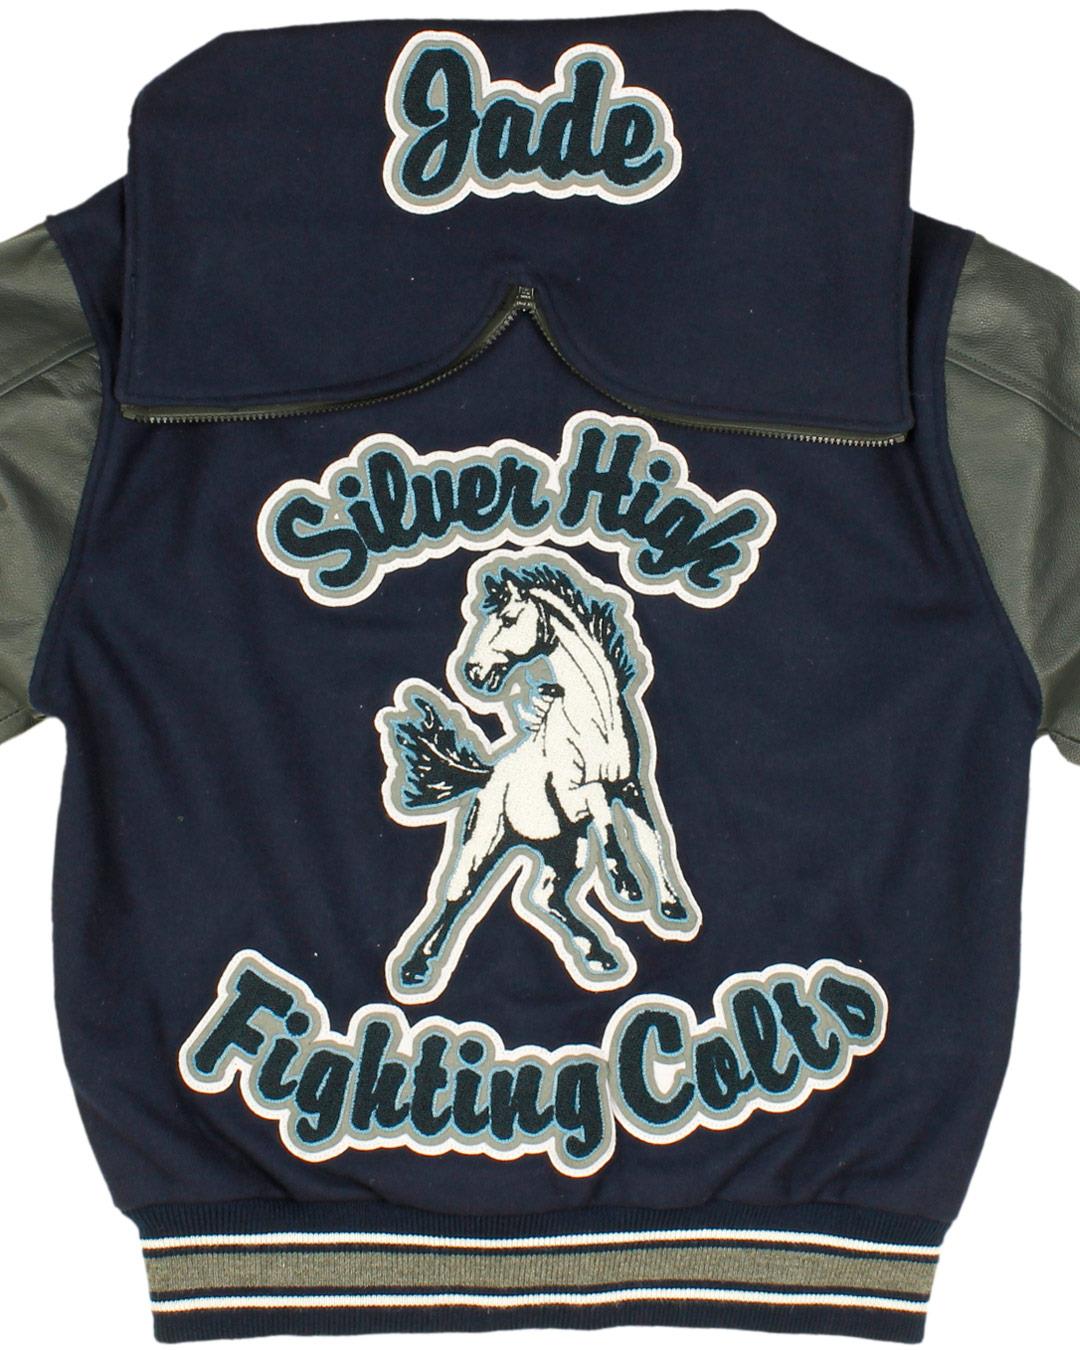 Silver High School Letter Jacket, Silver City NM - Back